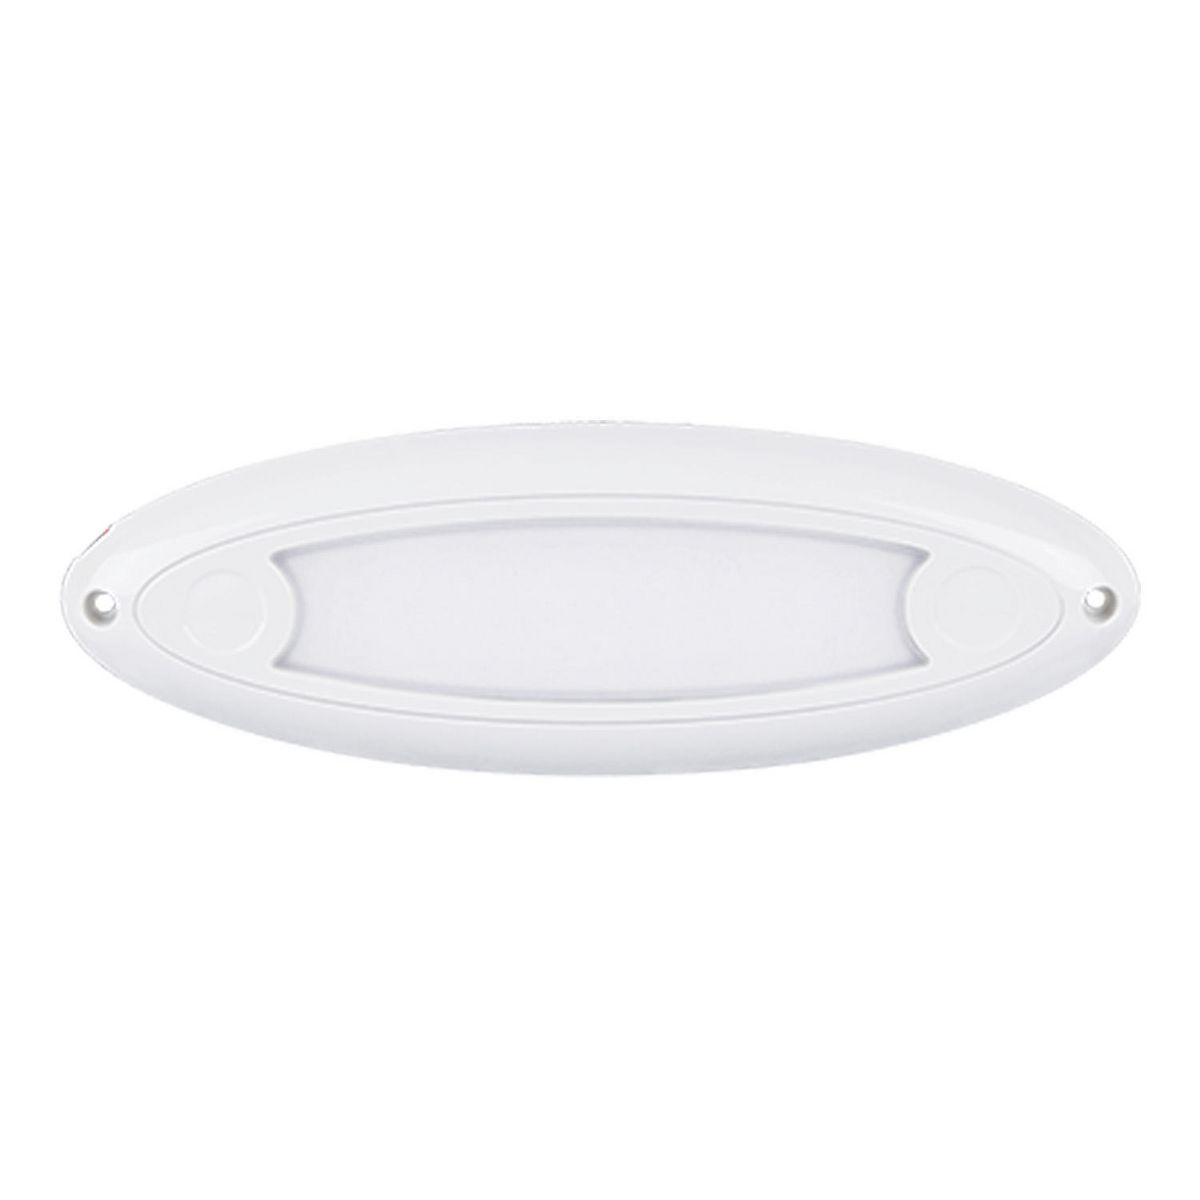 LARGE OVAL INTERIOR/EXTERIOR LAMP WHITE WITH POLYCARBONATE LENS/COVER AND ALUMINIUM BASE AND 20CM CABLE 10-30 VOLT IP67 400 EFFECTIVE LUMEN